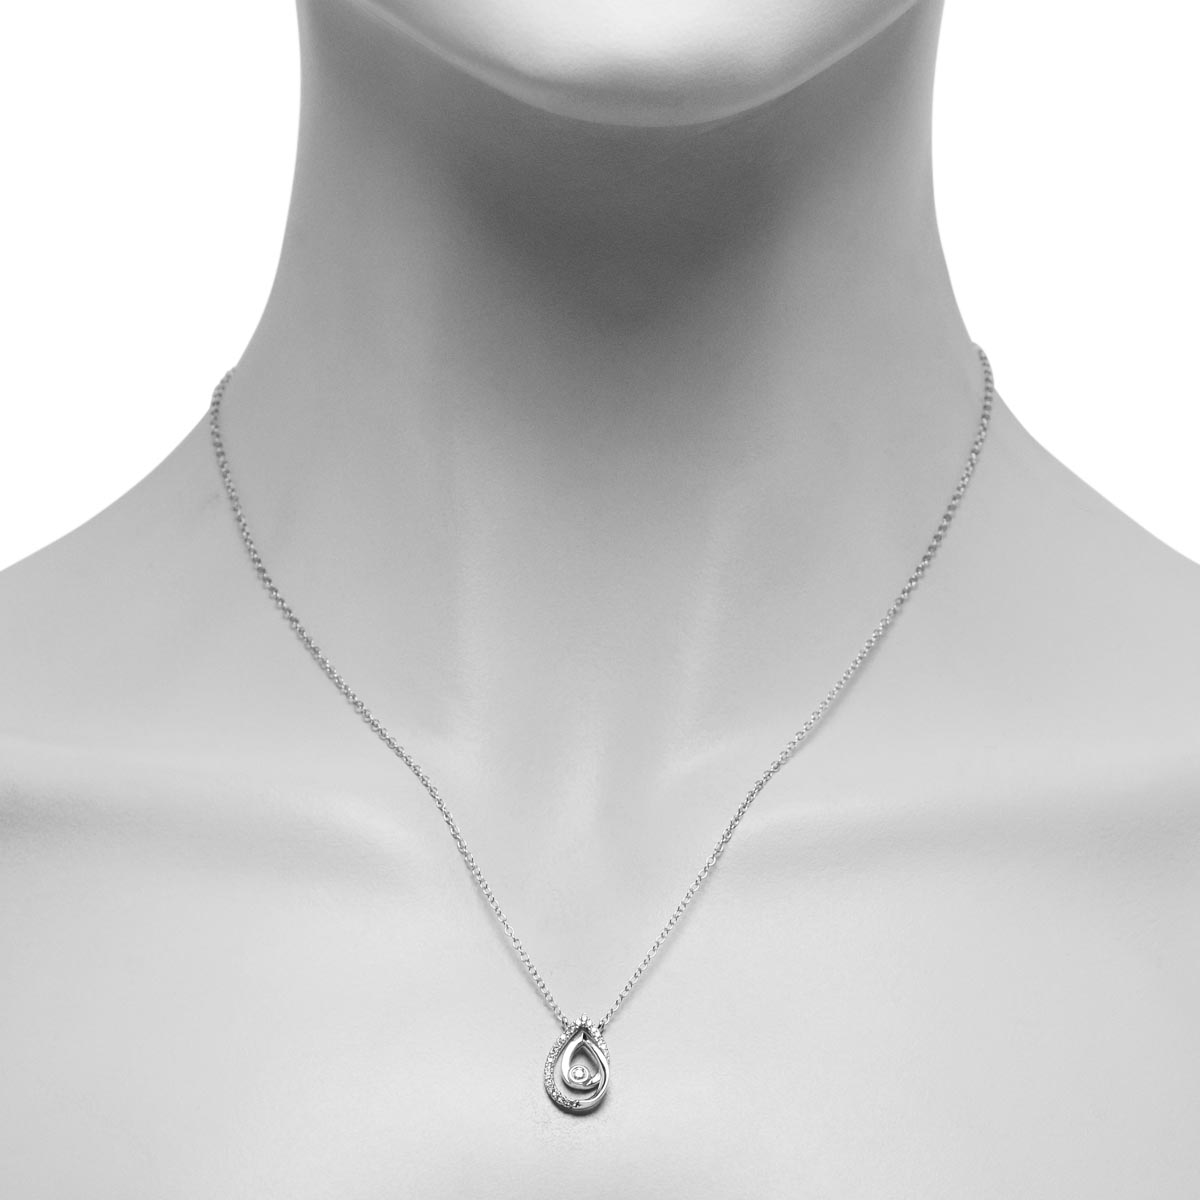 Northern Star Diamond Embrace Necklace in Sterling Silver (1/7ct tw)